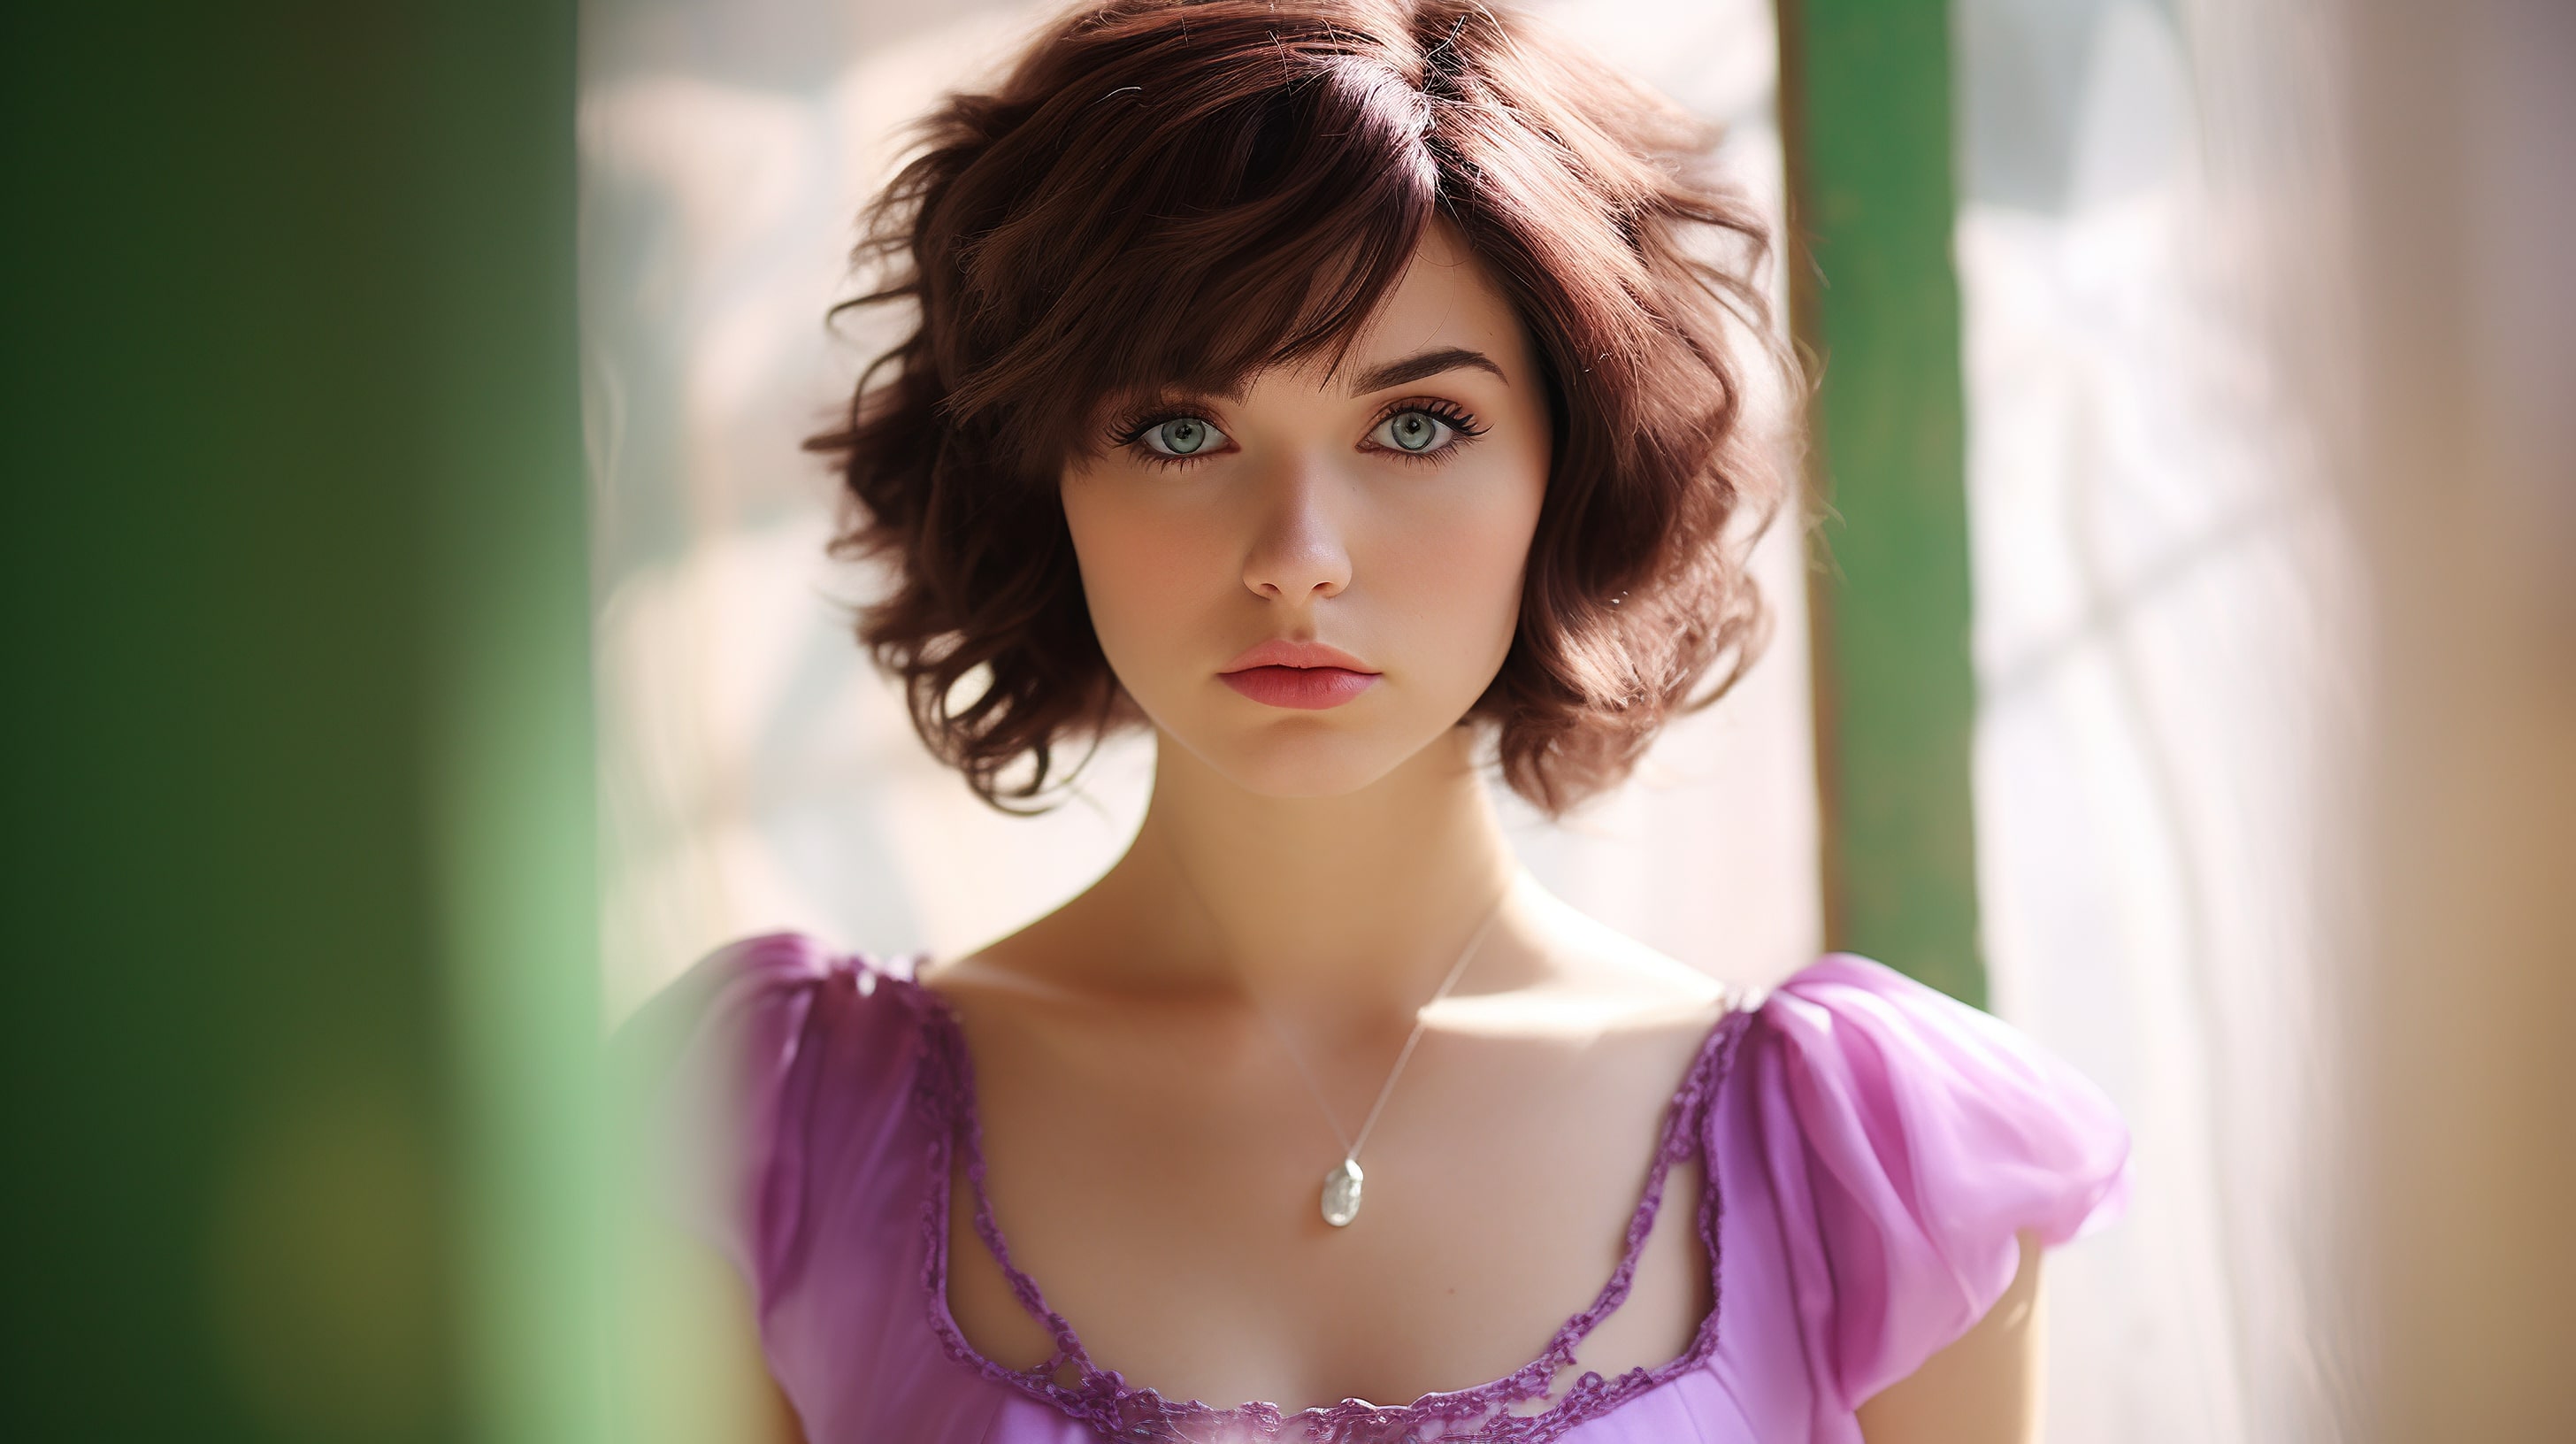 Beautiful short-haired girl in a pink dress